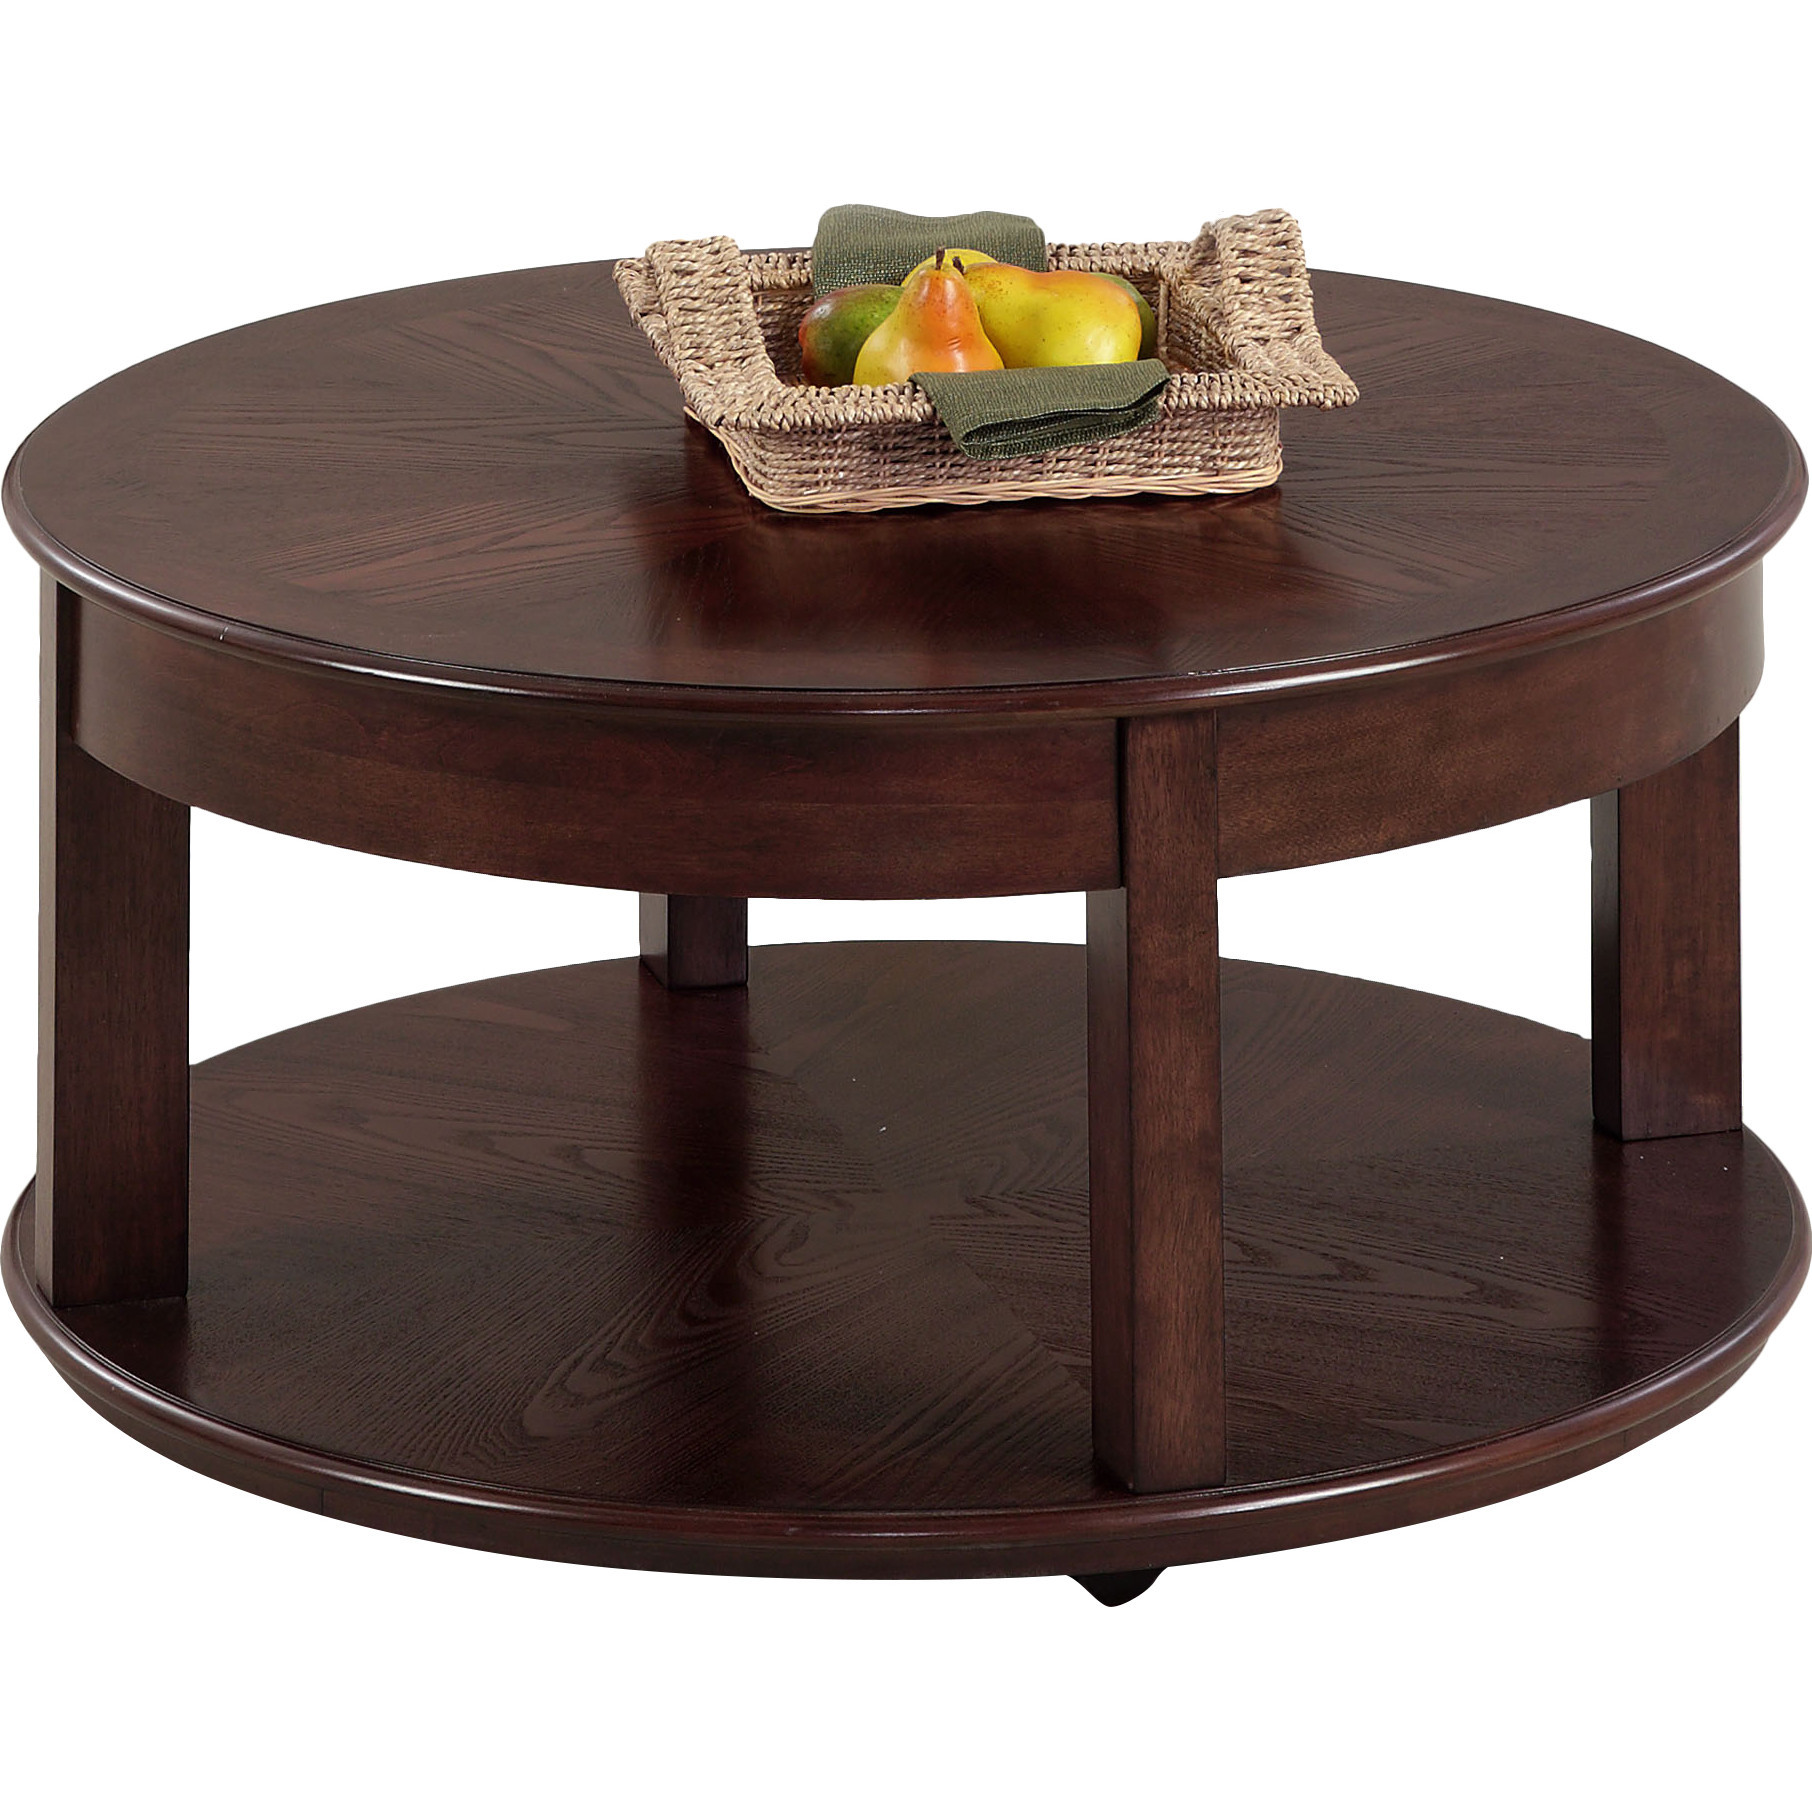 Best ideas about Round Coffee Table
. Save or Pin Darby Home Co Wilhoite Castered Round Coffee Table Now.